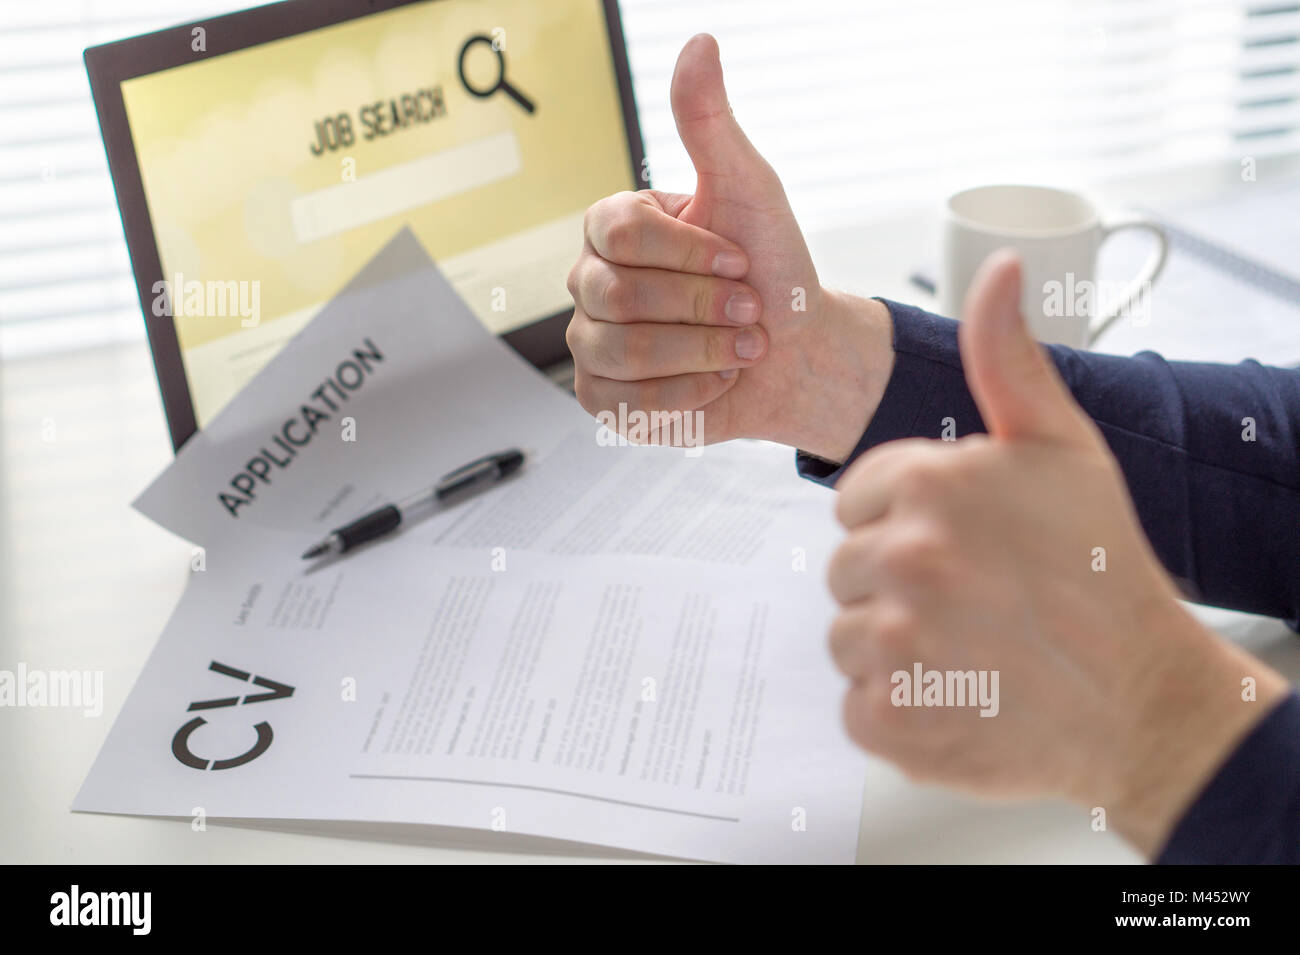 Thumbs up for job search. Applicant with positive attitude. Happy job seeker showing two hand gestures. Cheerful man pleased with finding work. Stock Photo